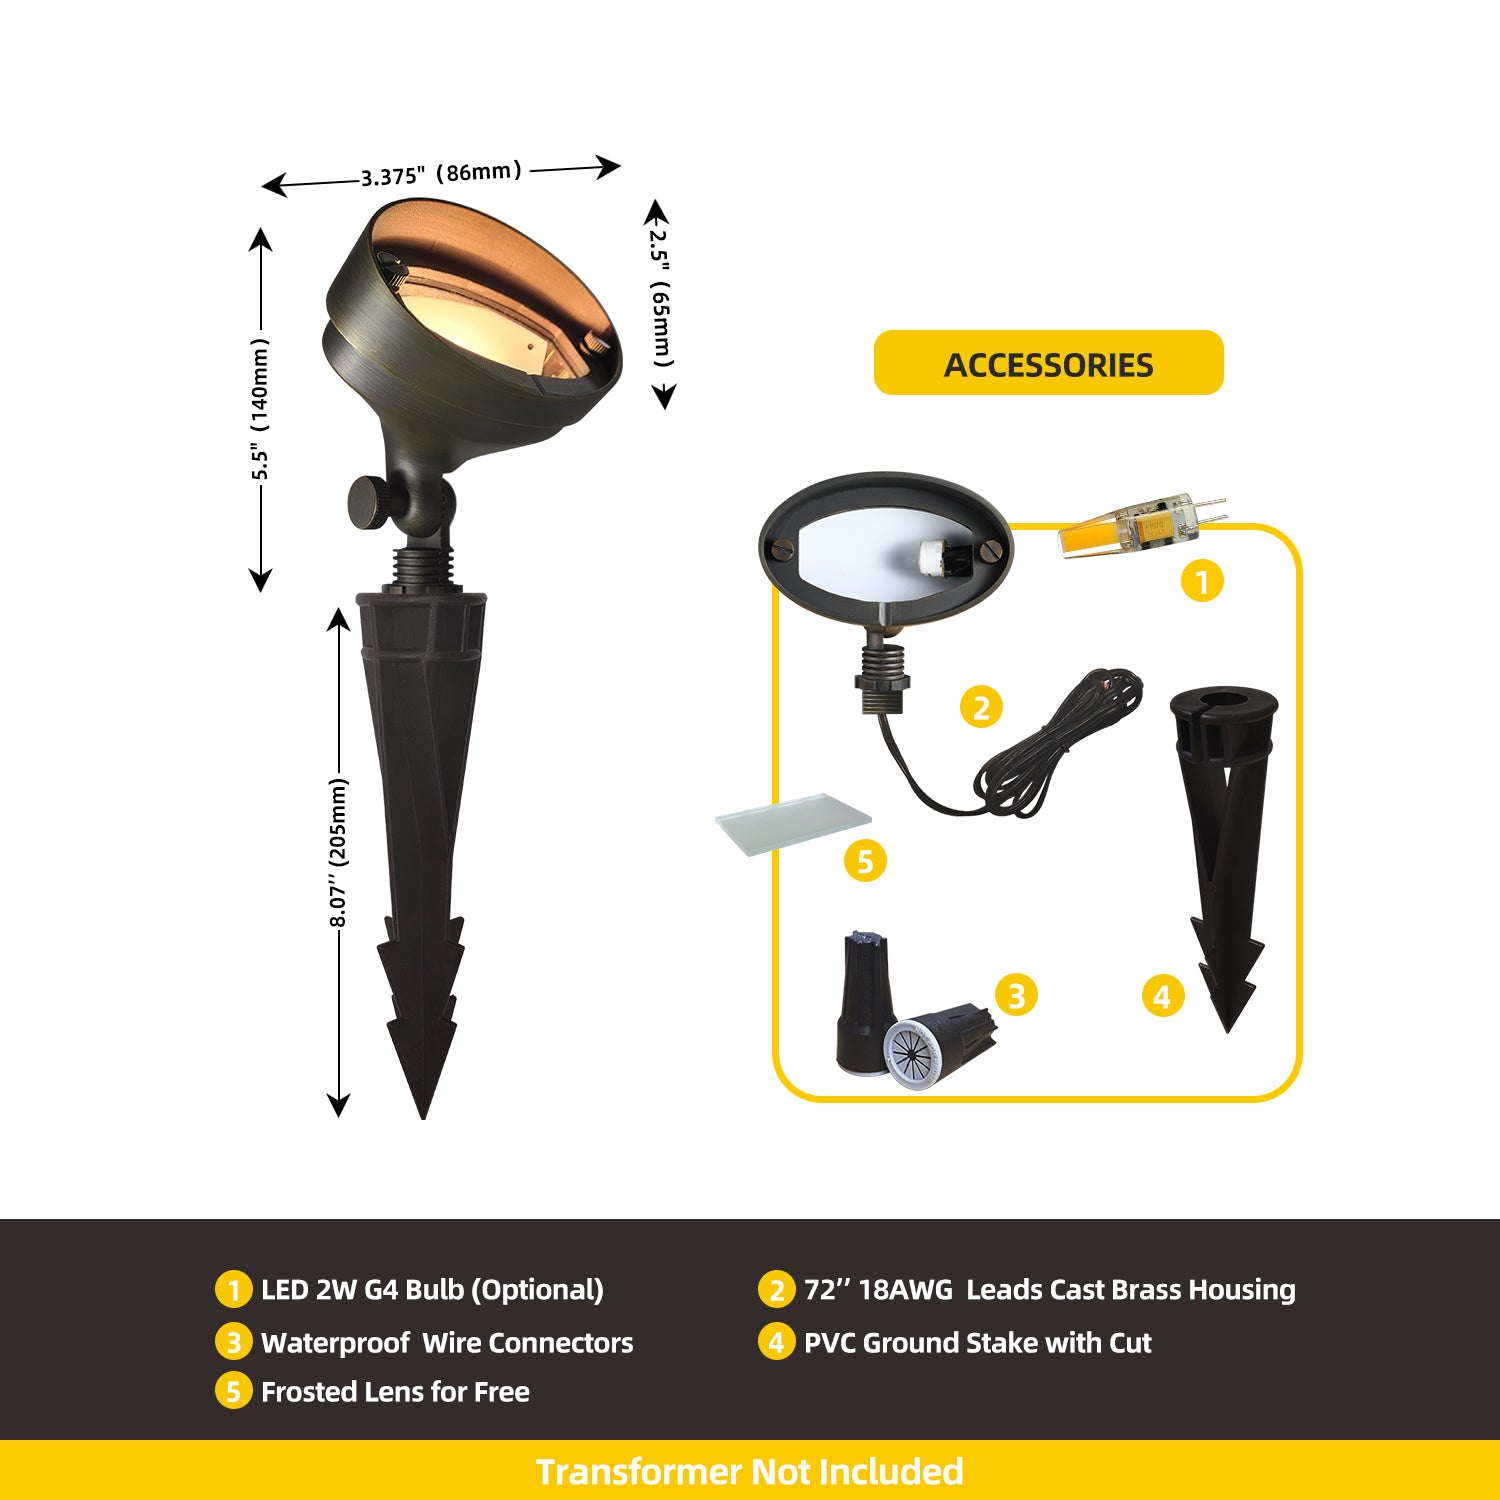 COLOER Brass Oval Flood Light COF501B with dimensions and included accessories: LED 2W G4 bulb, waterproof wire connectors, frosted lens, 72-inch 18AWG leads cast brass housing, and PVC ground stake.